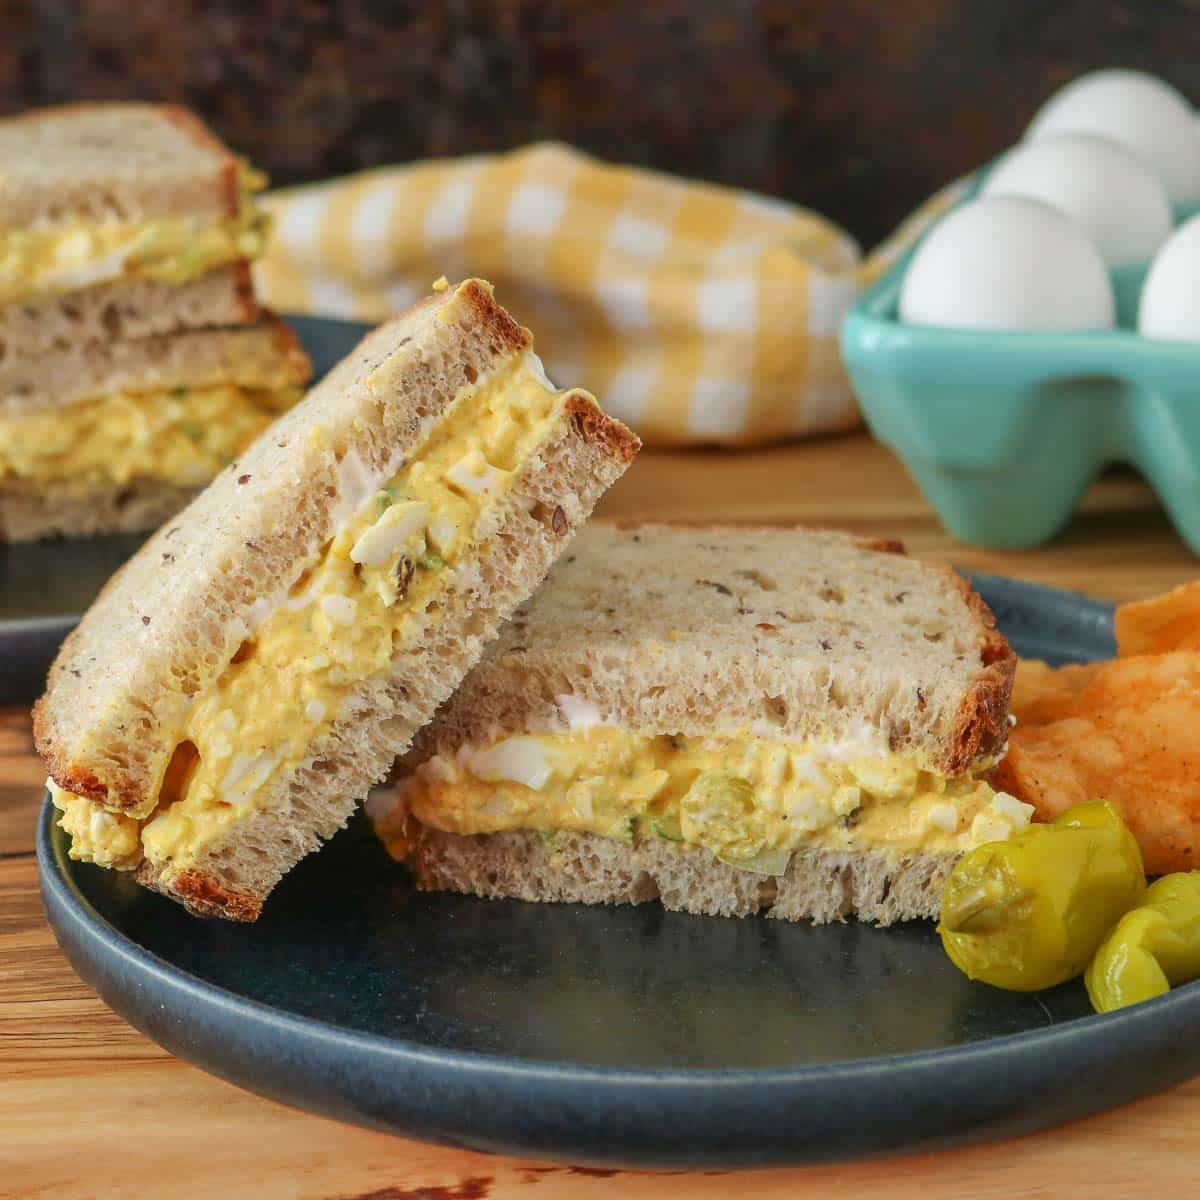 Two halves of a curried egg salad sandwich on a plate, one half resting on the other half.